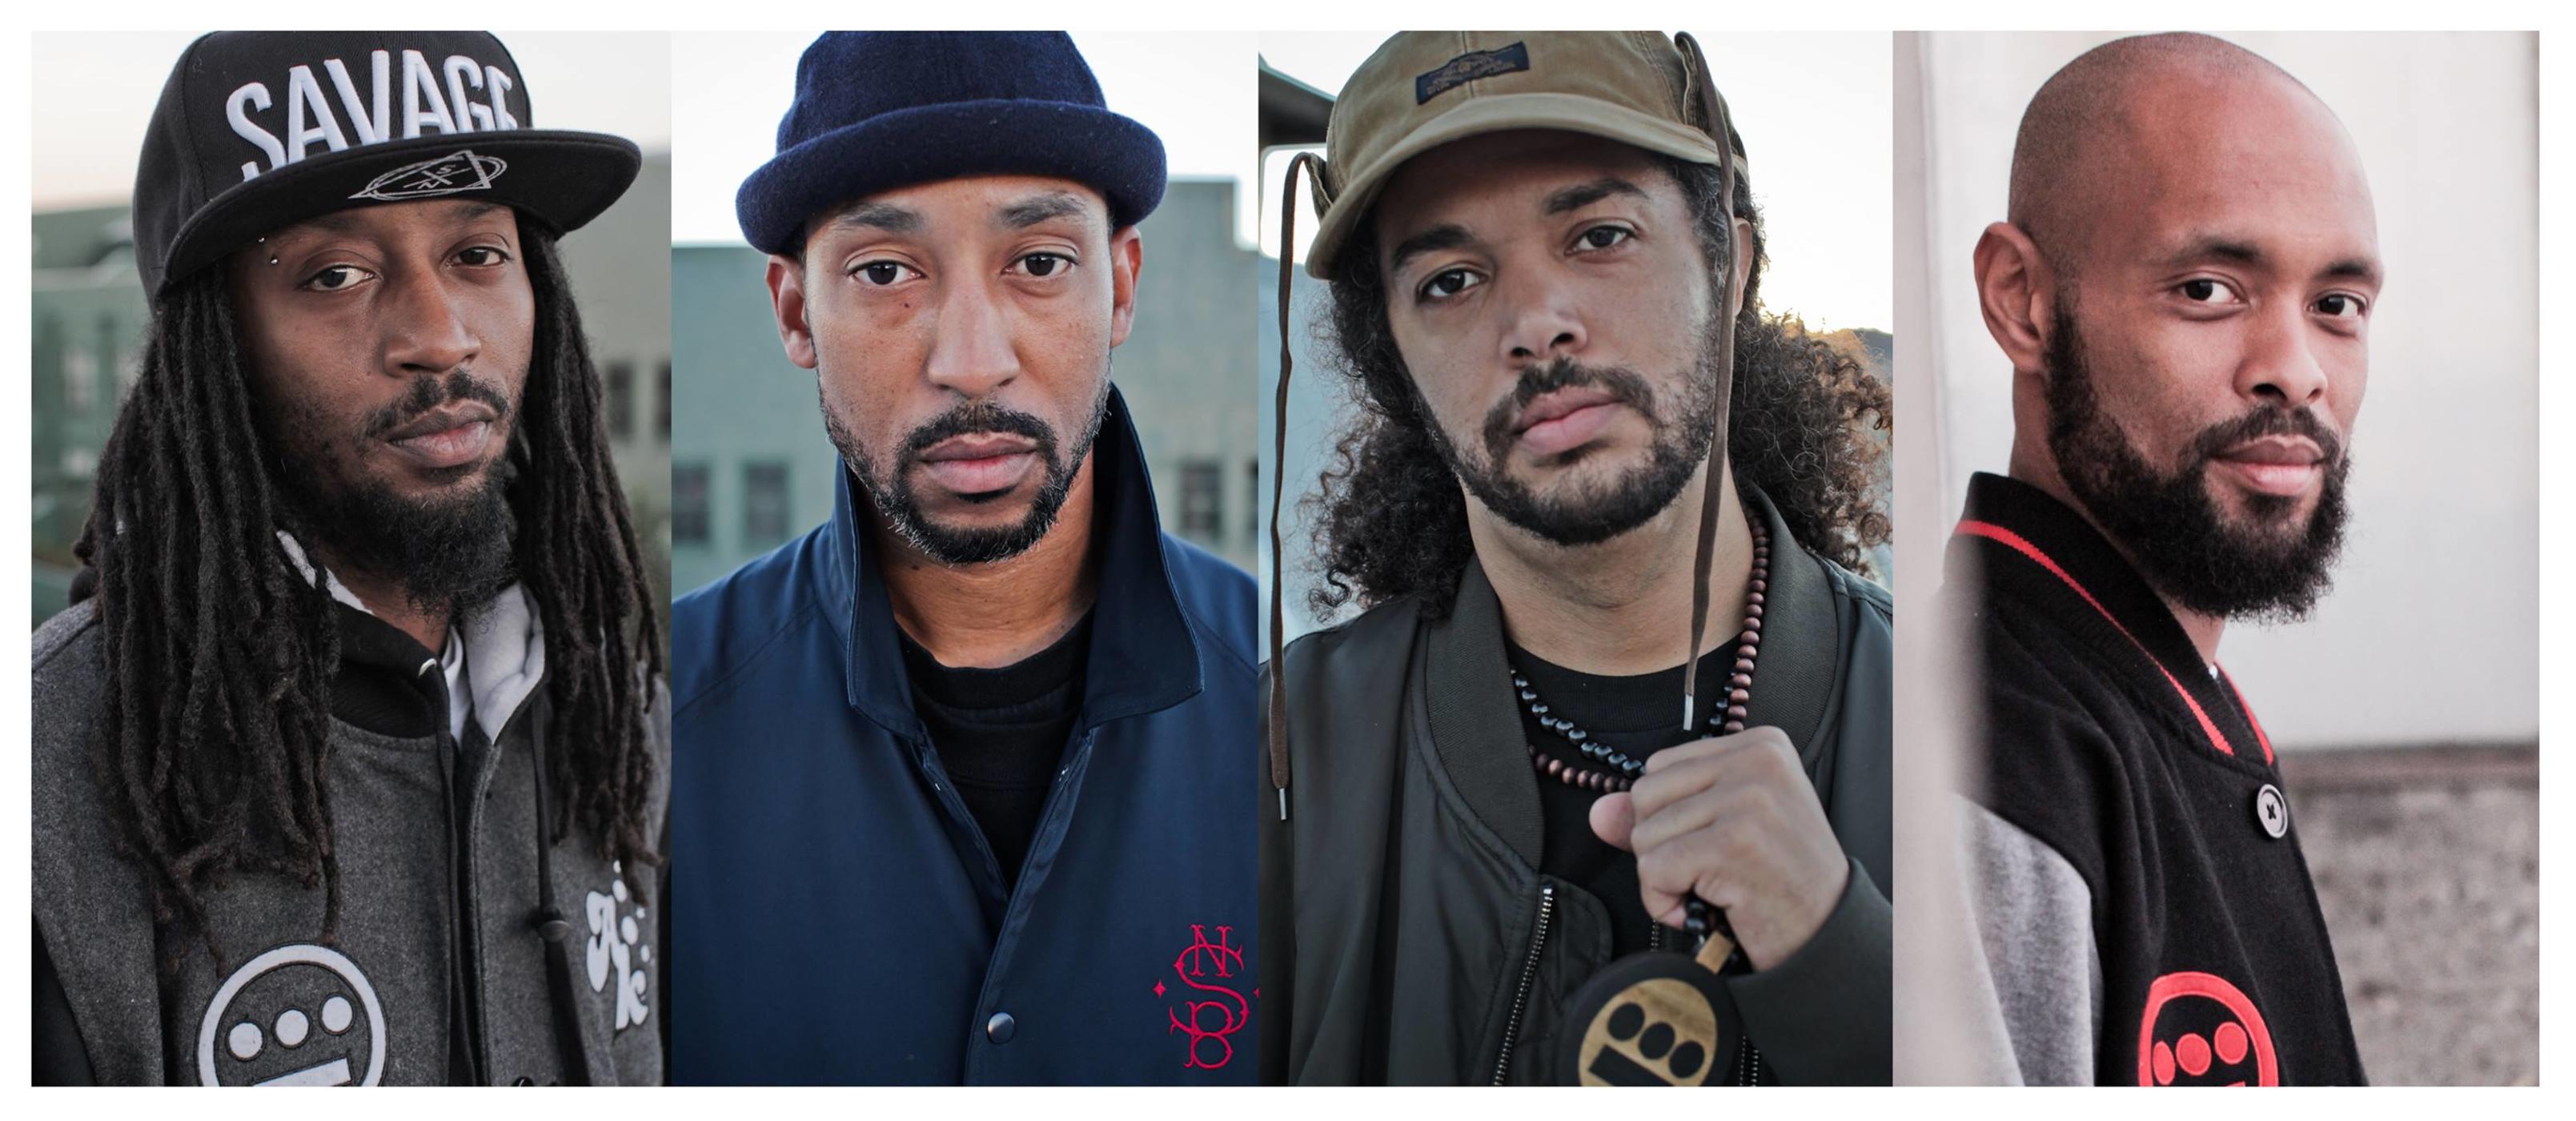 Book Souls of Mischief on BeatGig · Thousands of Artists at Your 